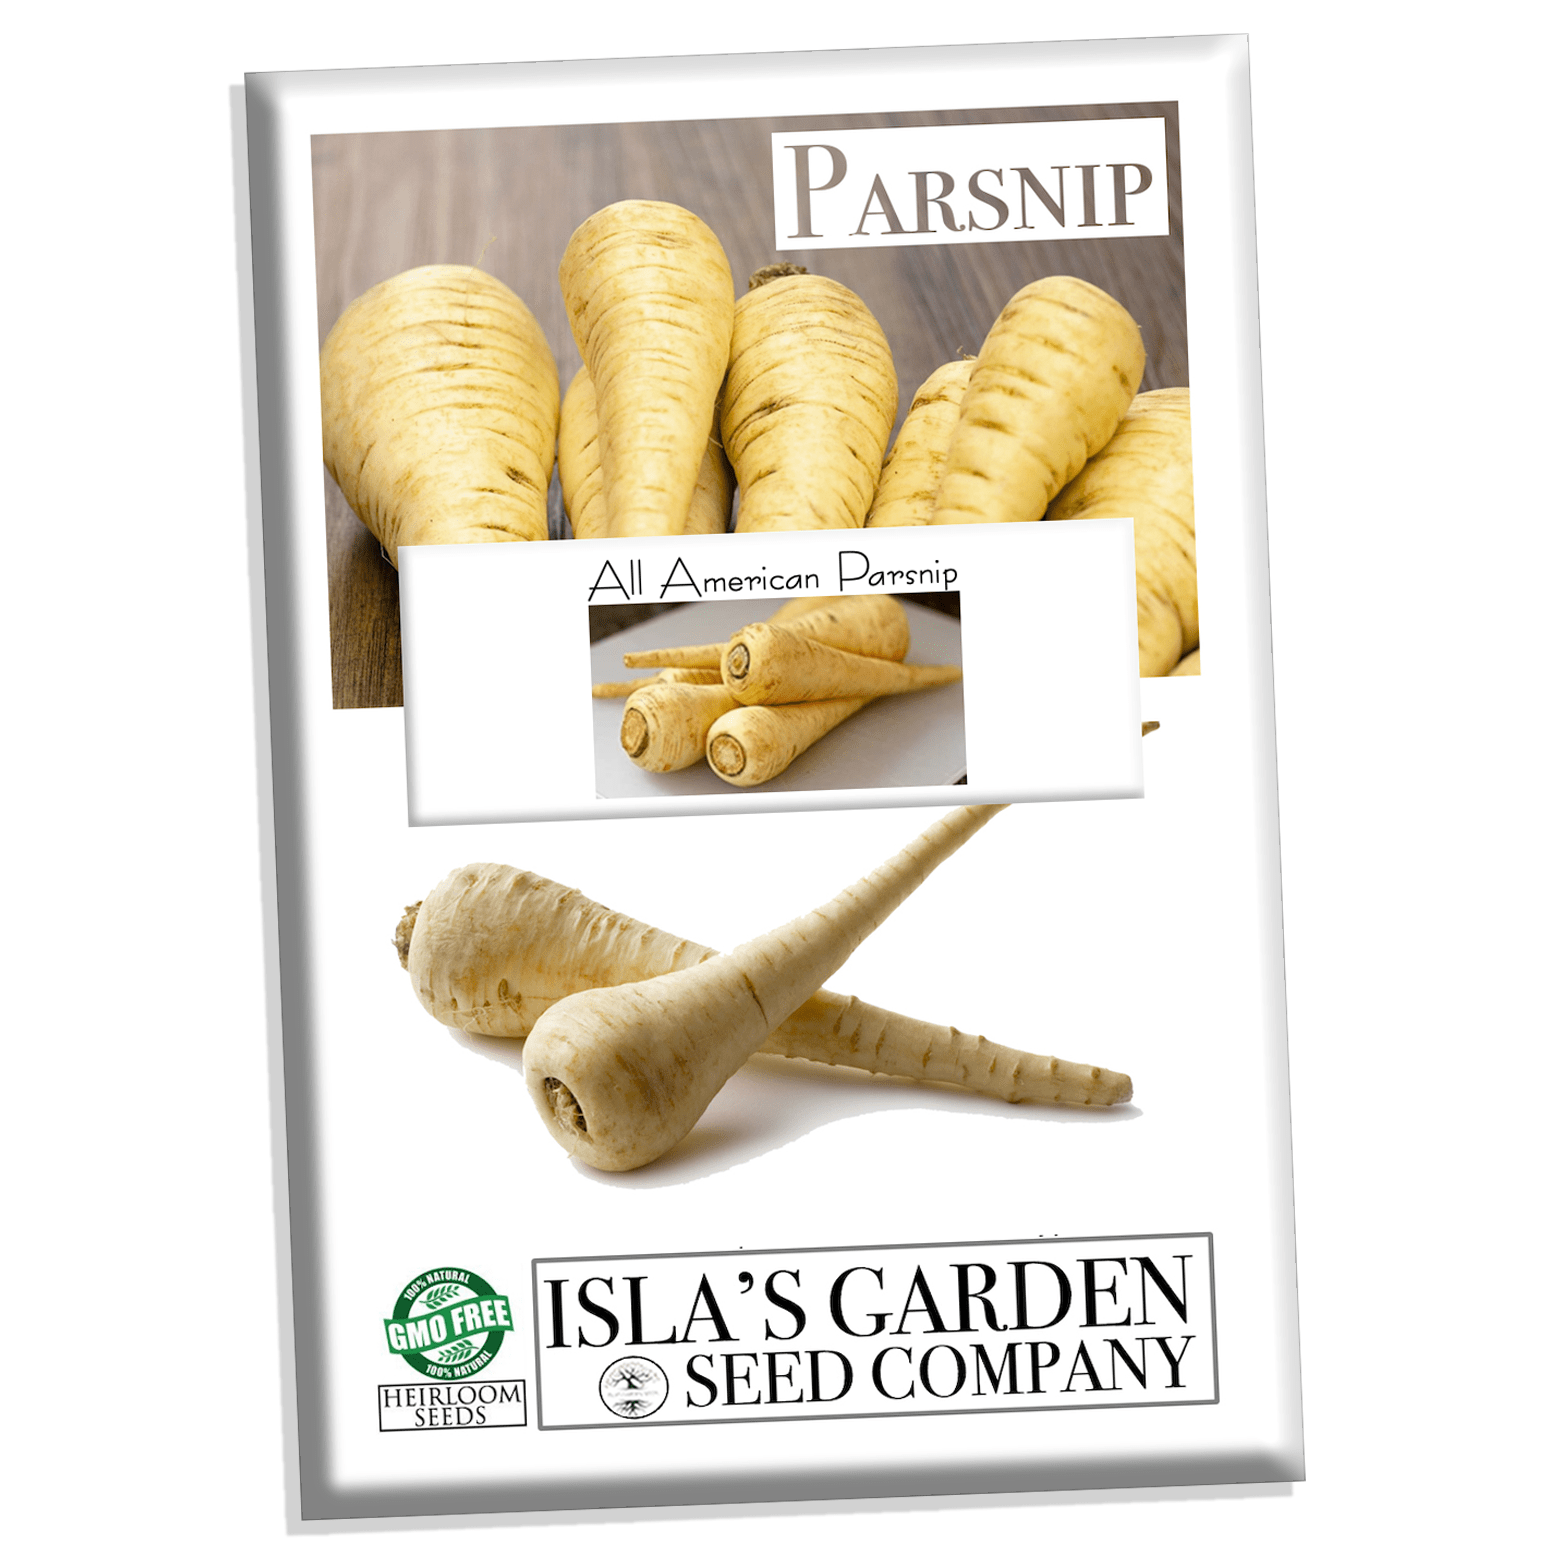 All American Parsnip Seeds, 300 Seeds Per Packet, Non GMO Seeds